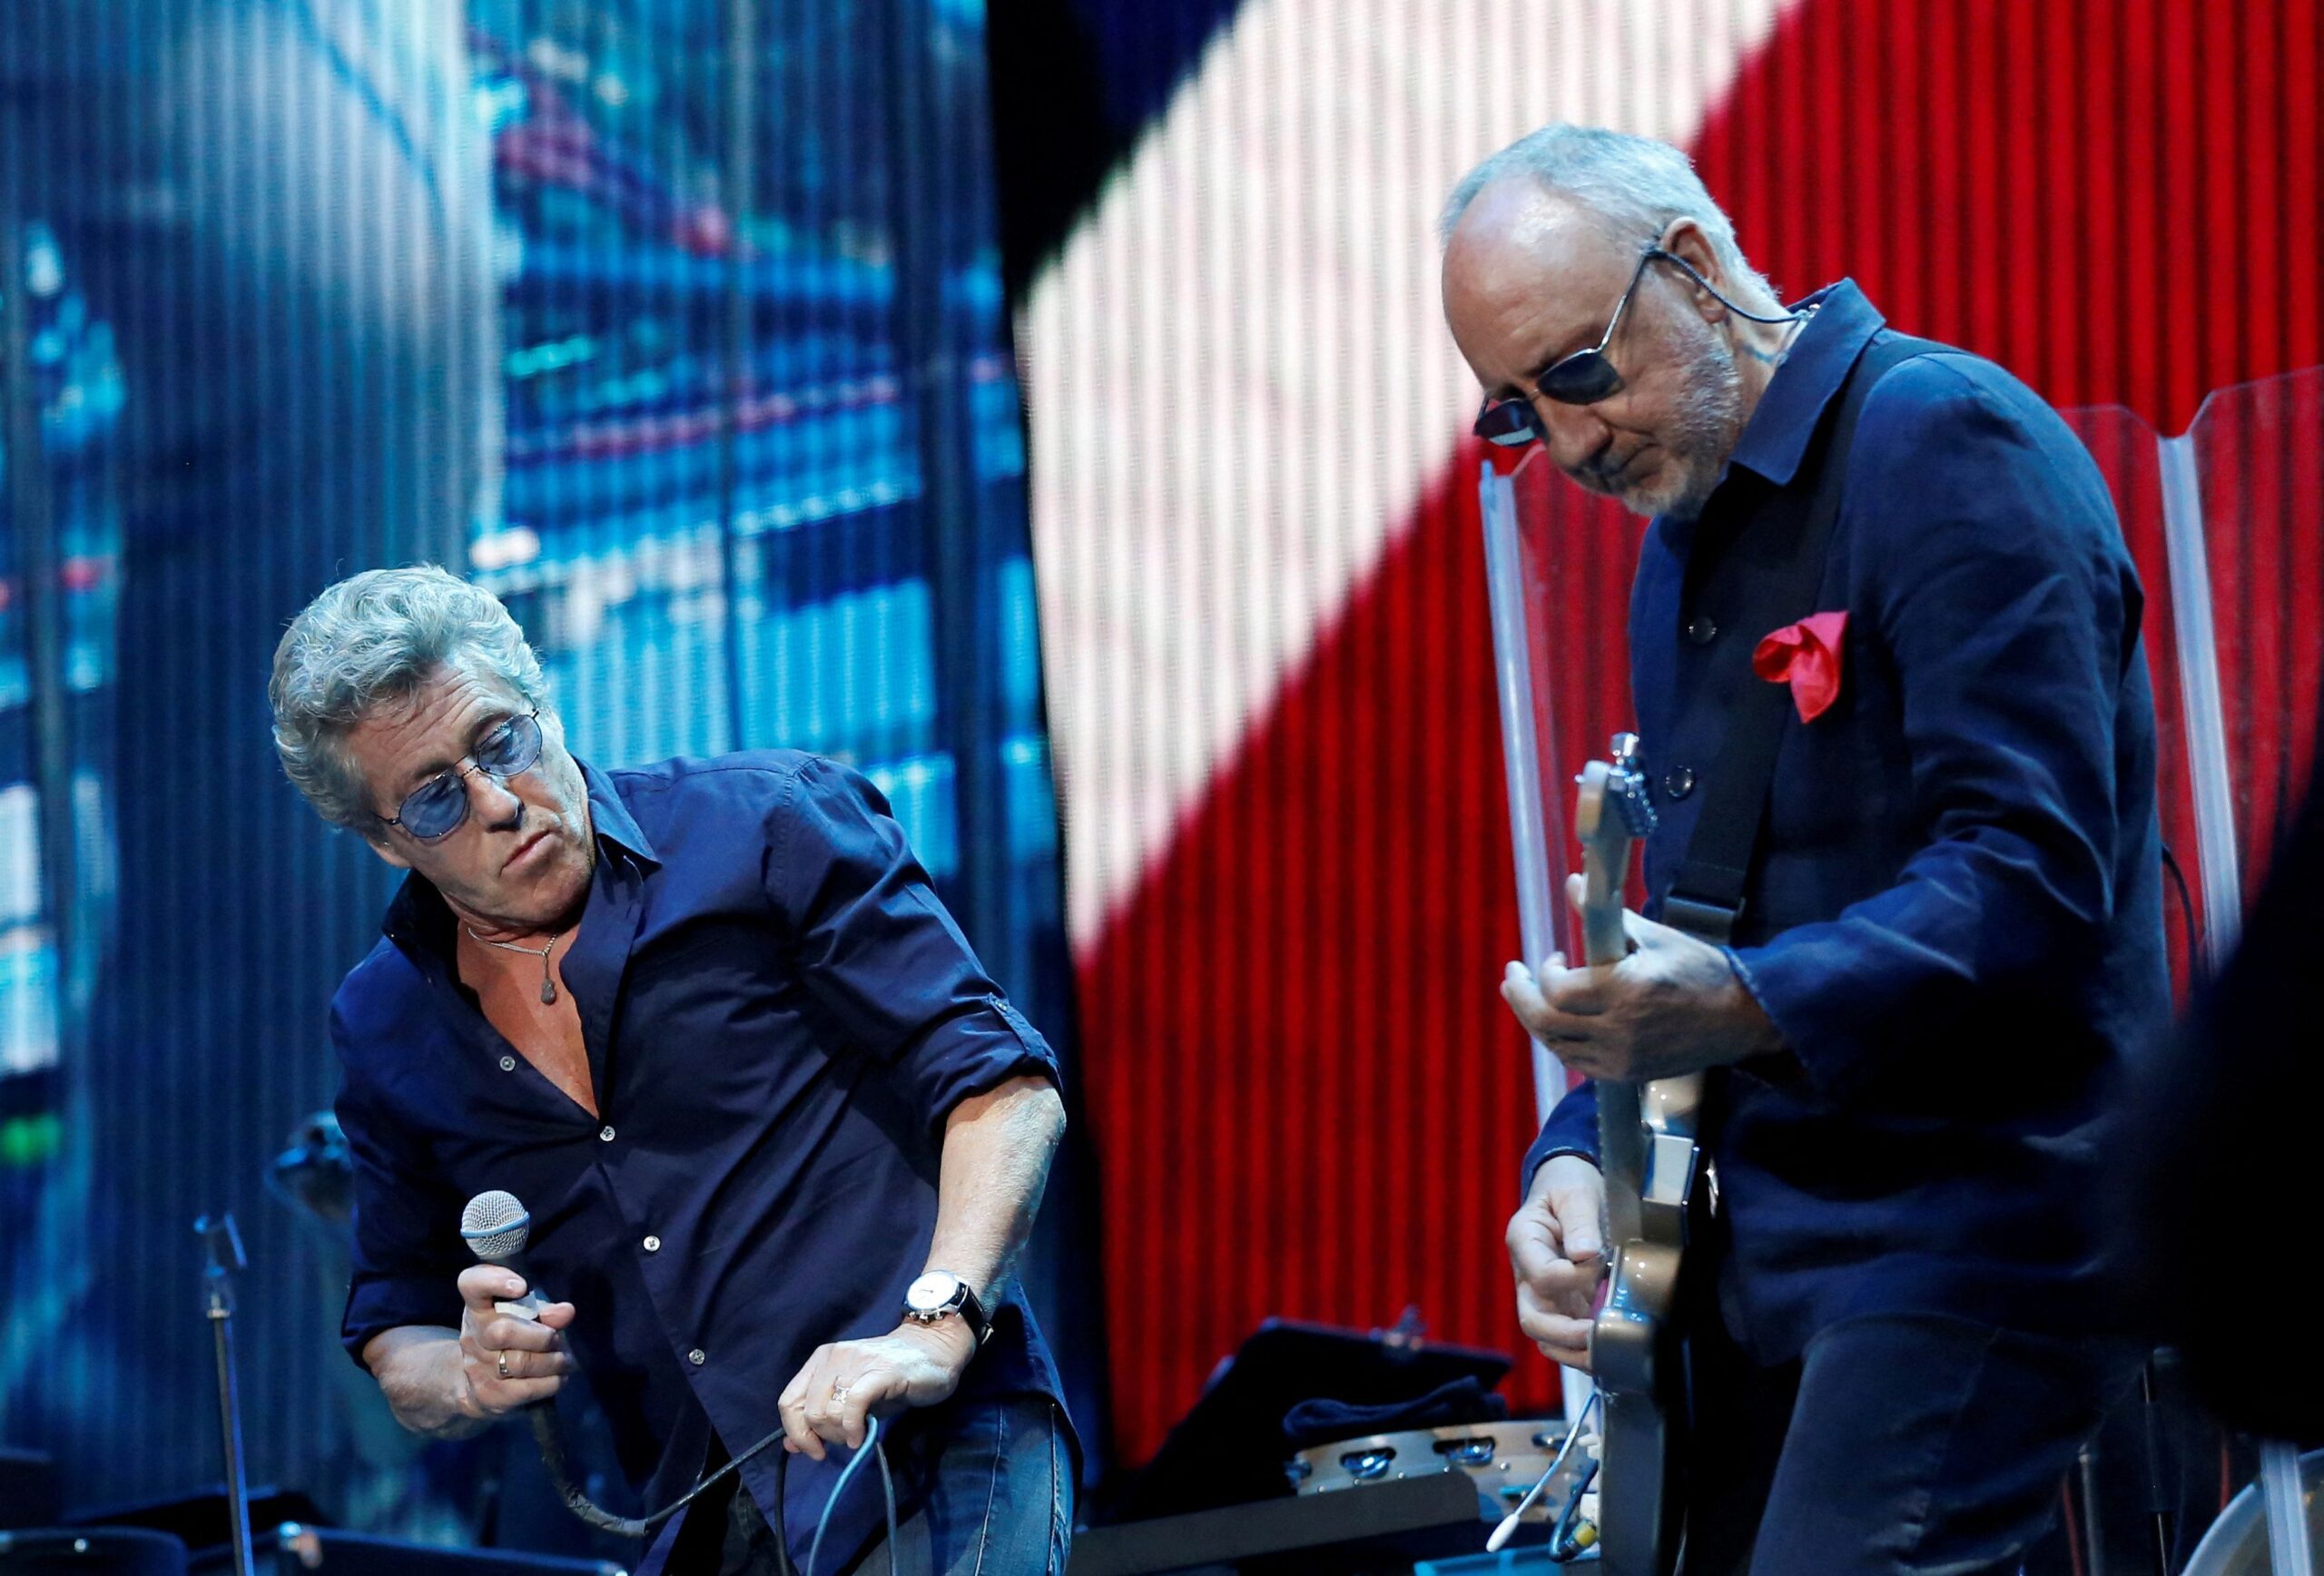 The Who back on tour after COVID cancelations